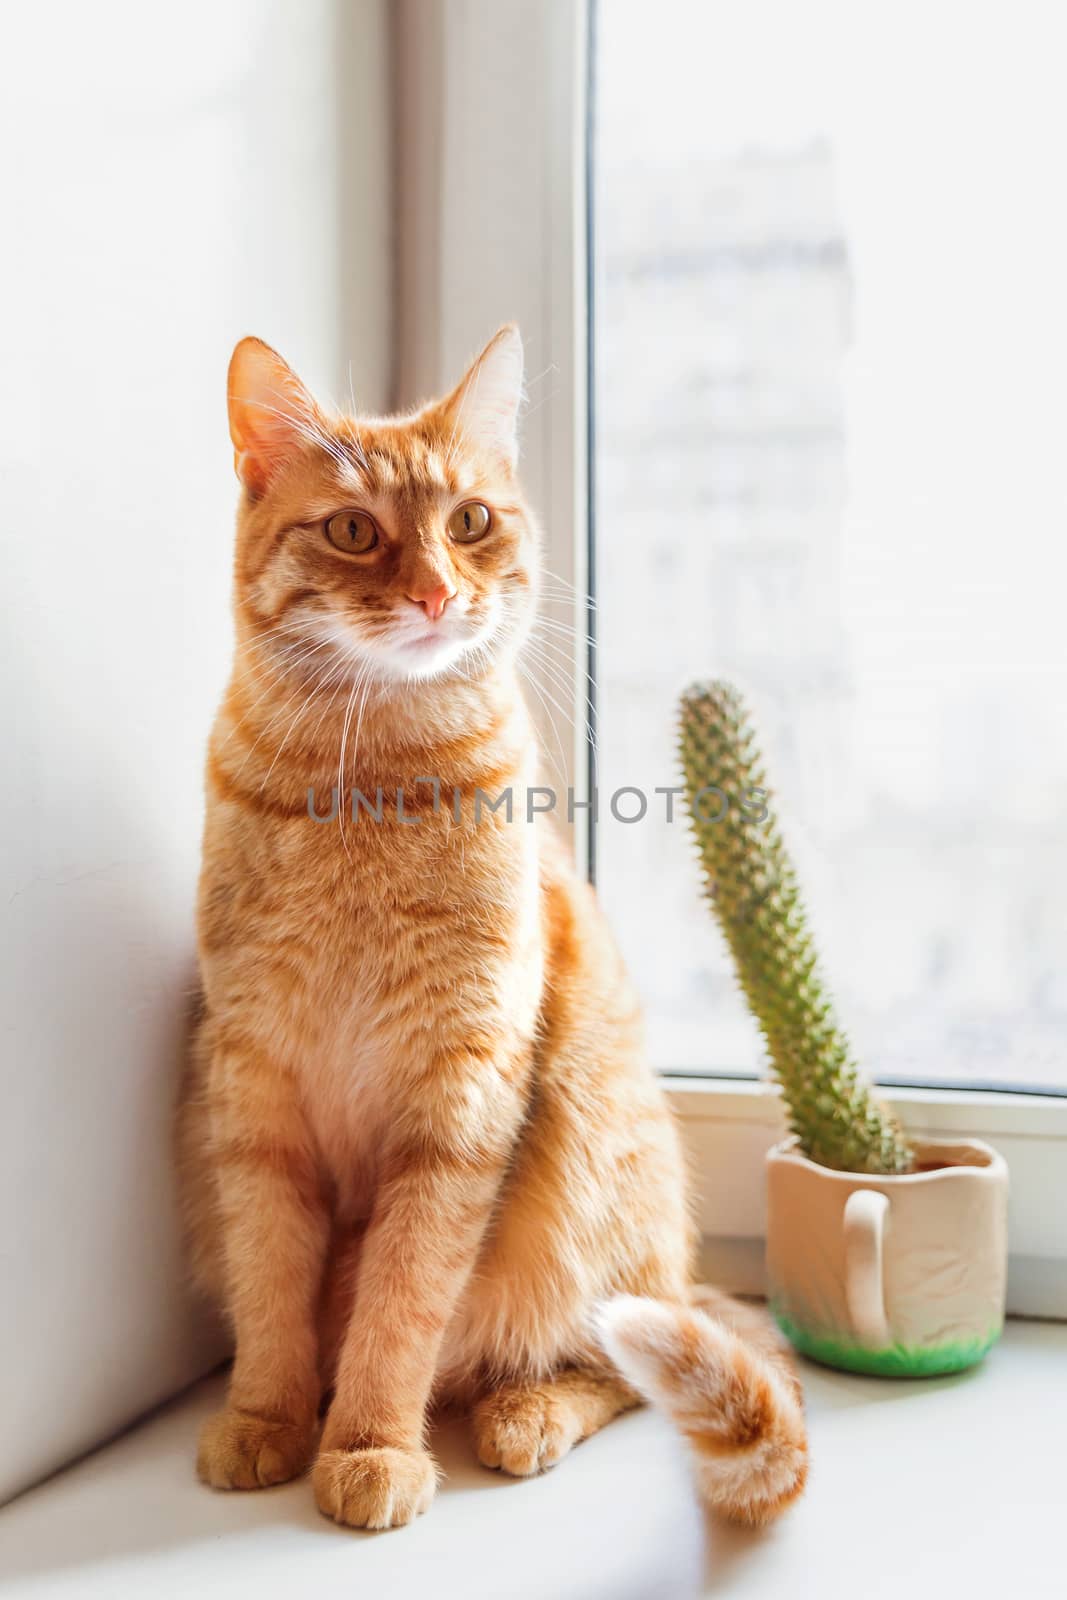 Cute ginger cat sitting on window sill near high prickly cactus. Cozy home background with domestic fluffy pet.